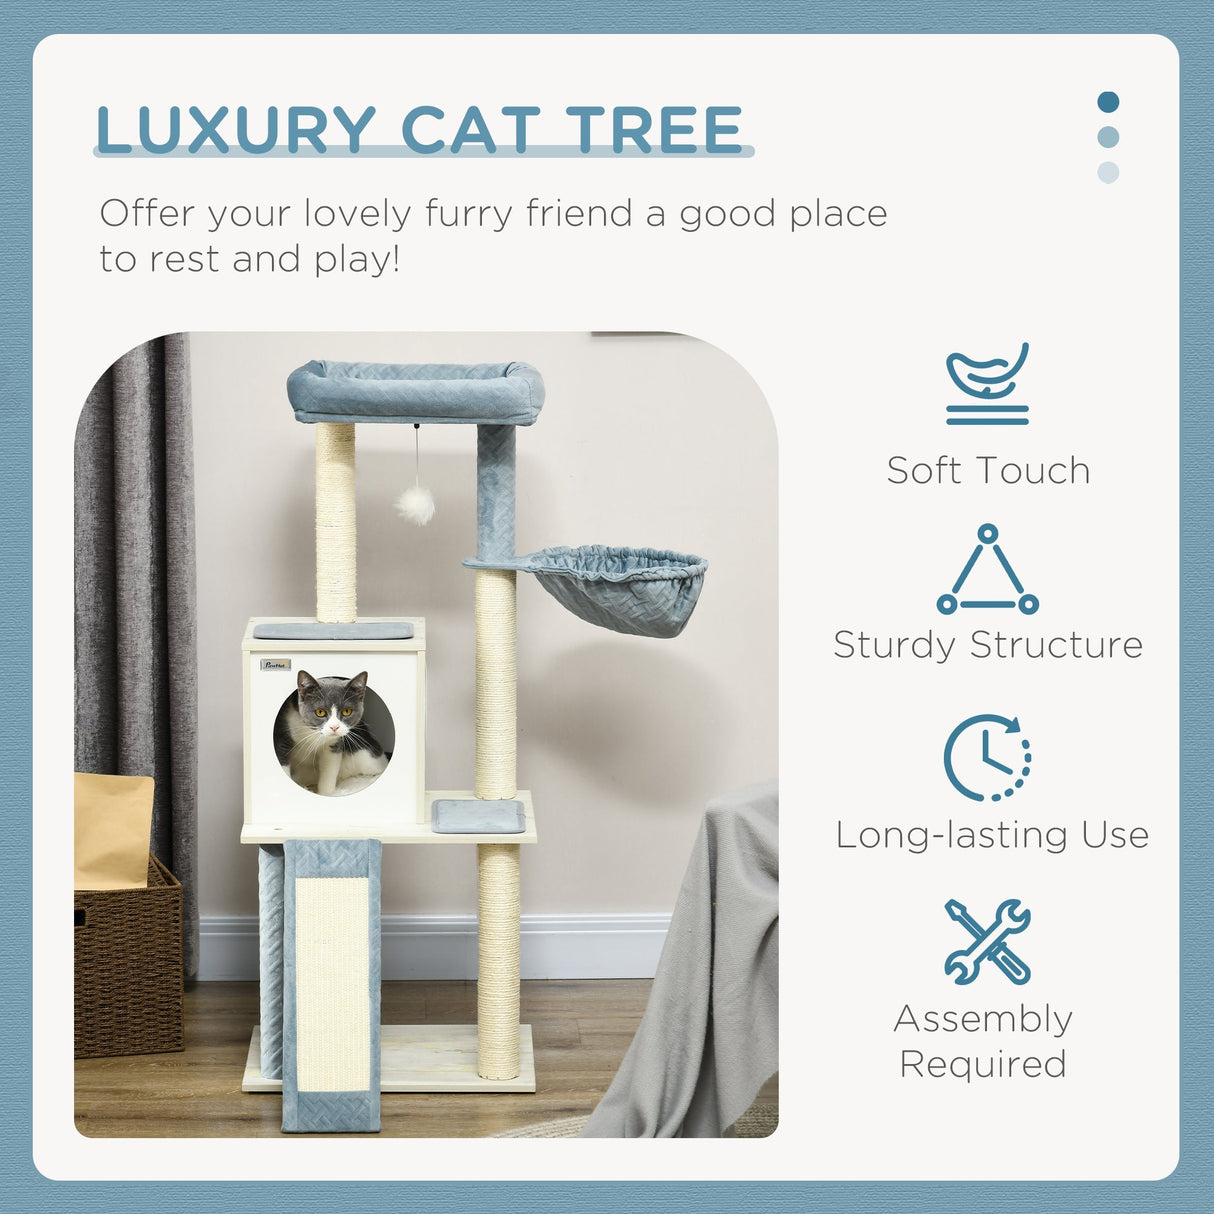 114cm Cat Tree for Indoor Cats, with Scratching Posts, hammock, Bed, House, PawHut,